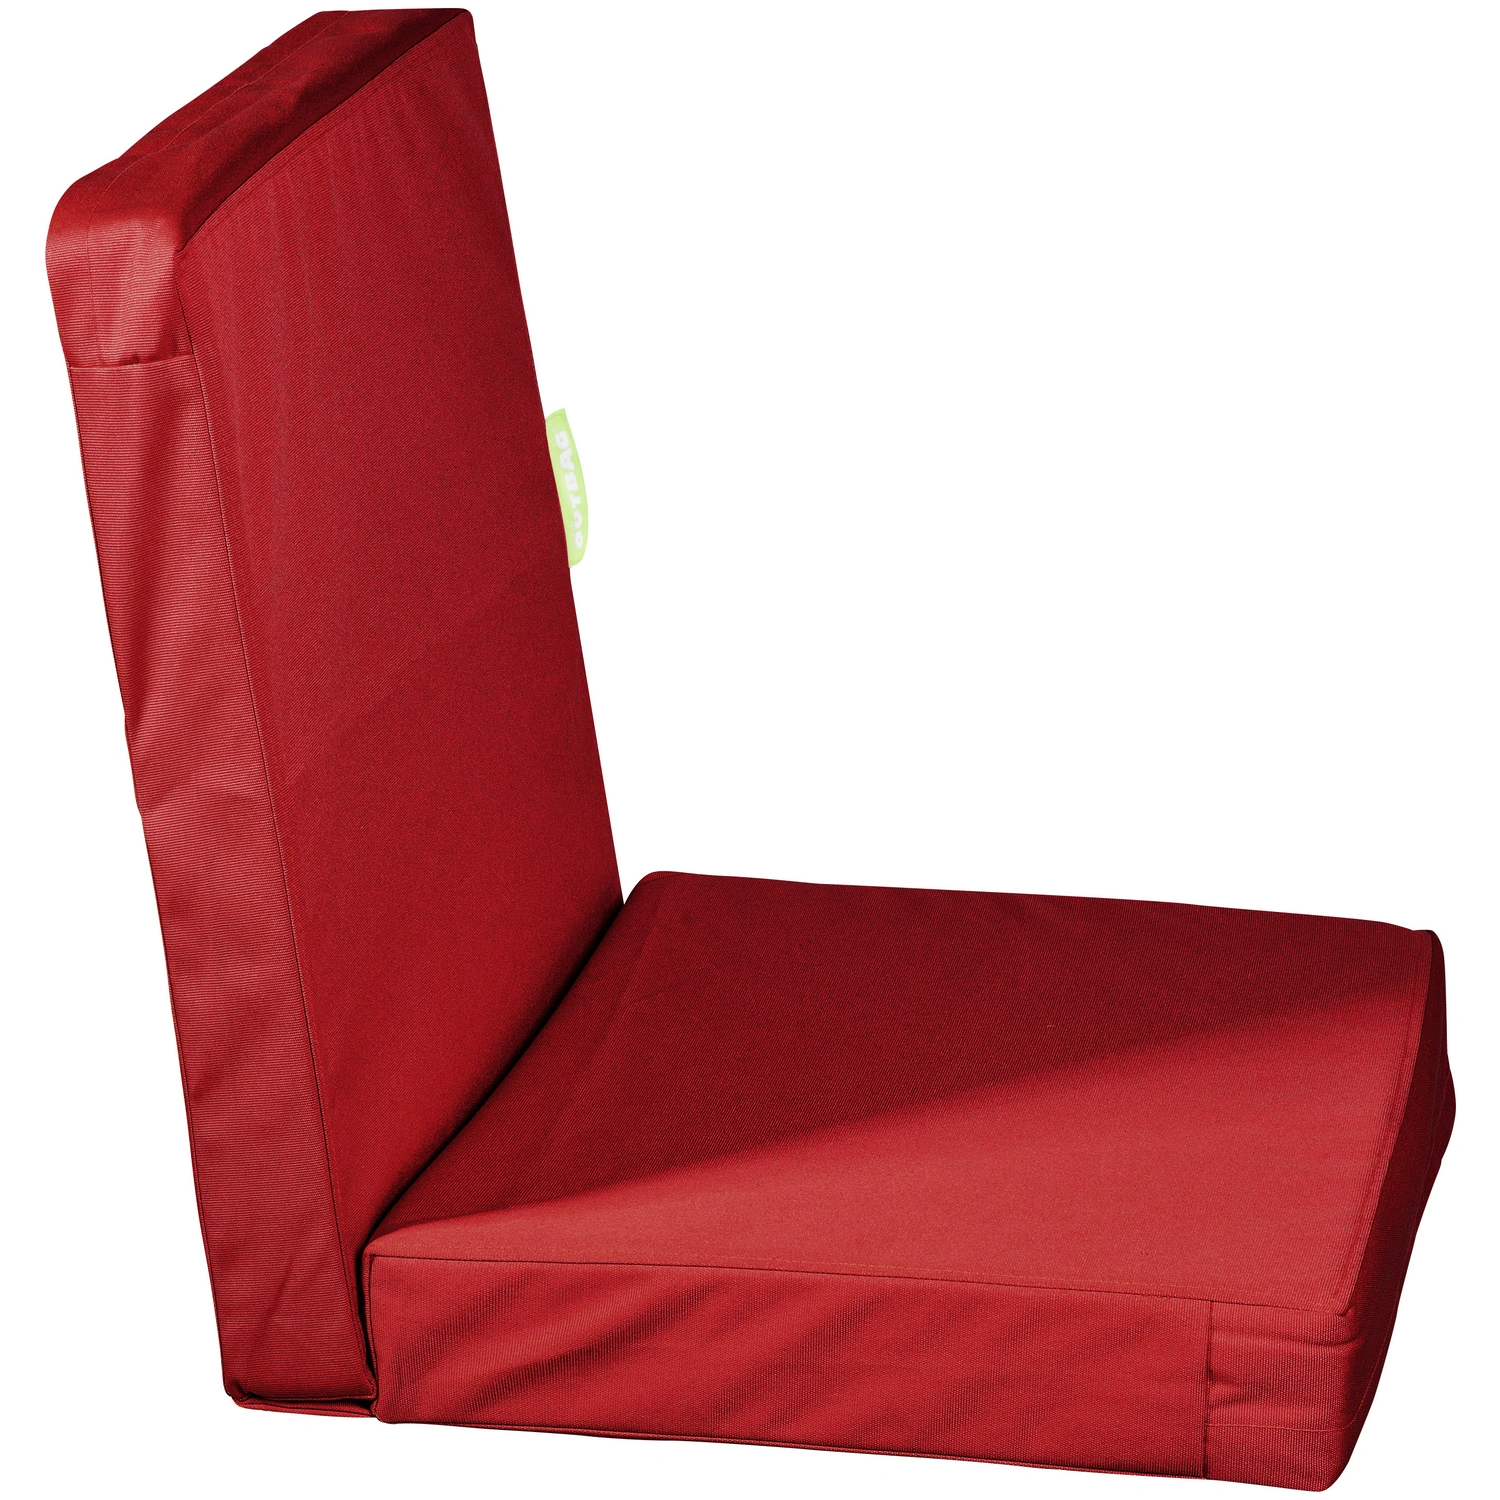 OUTBAG Sesselauflage »HighRise Plus«, 50 105 cm rot, BxL: x